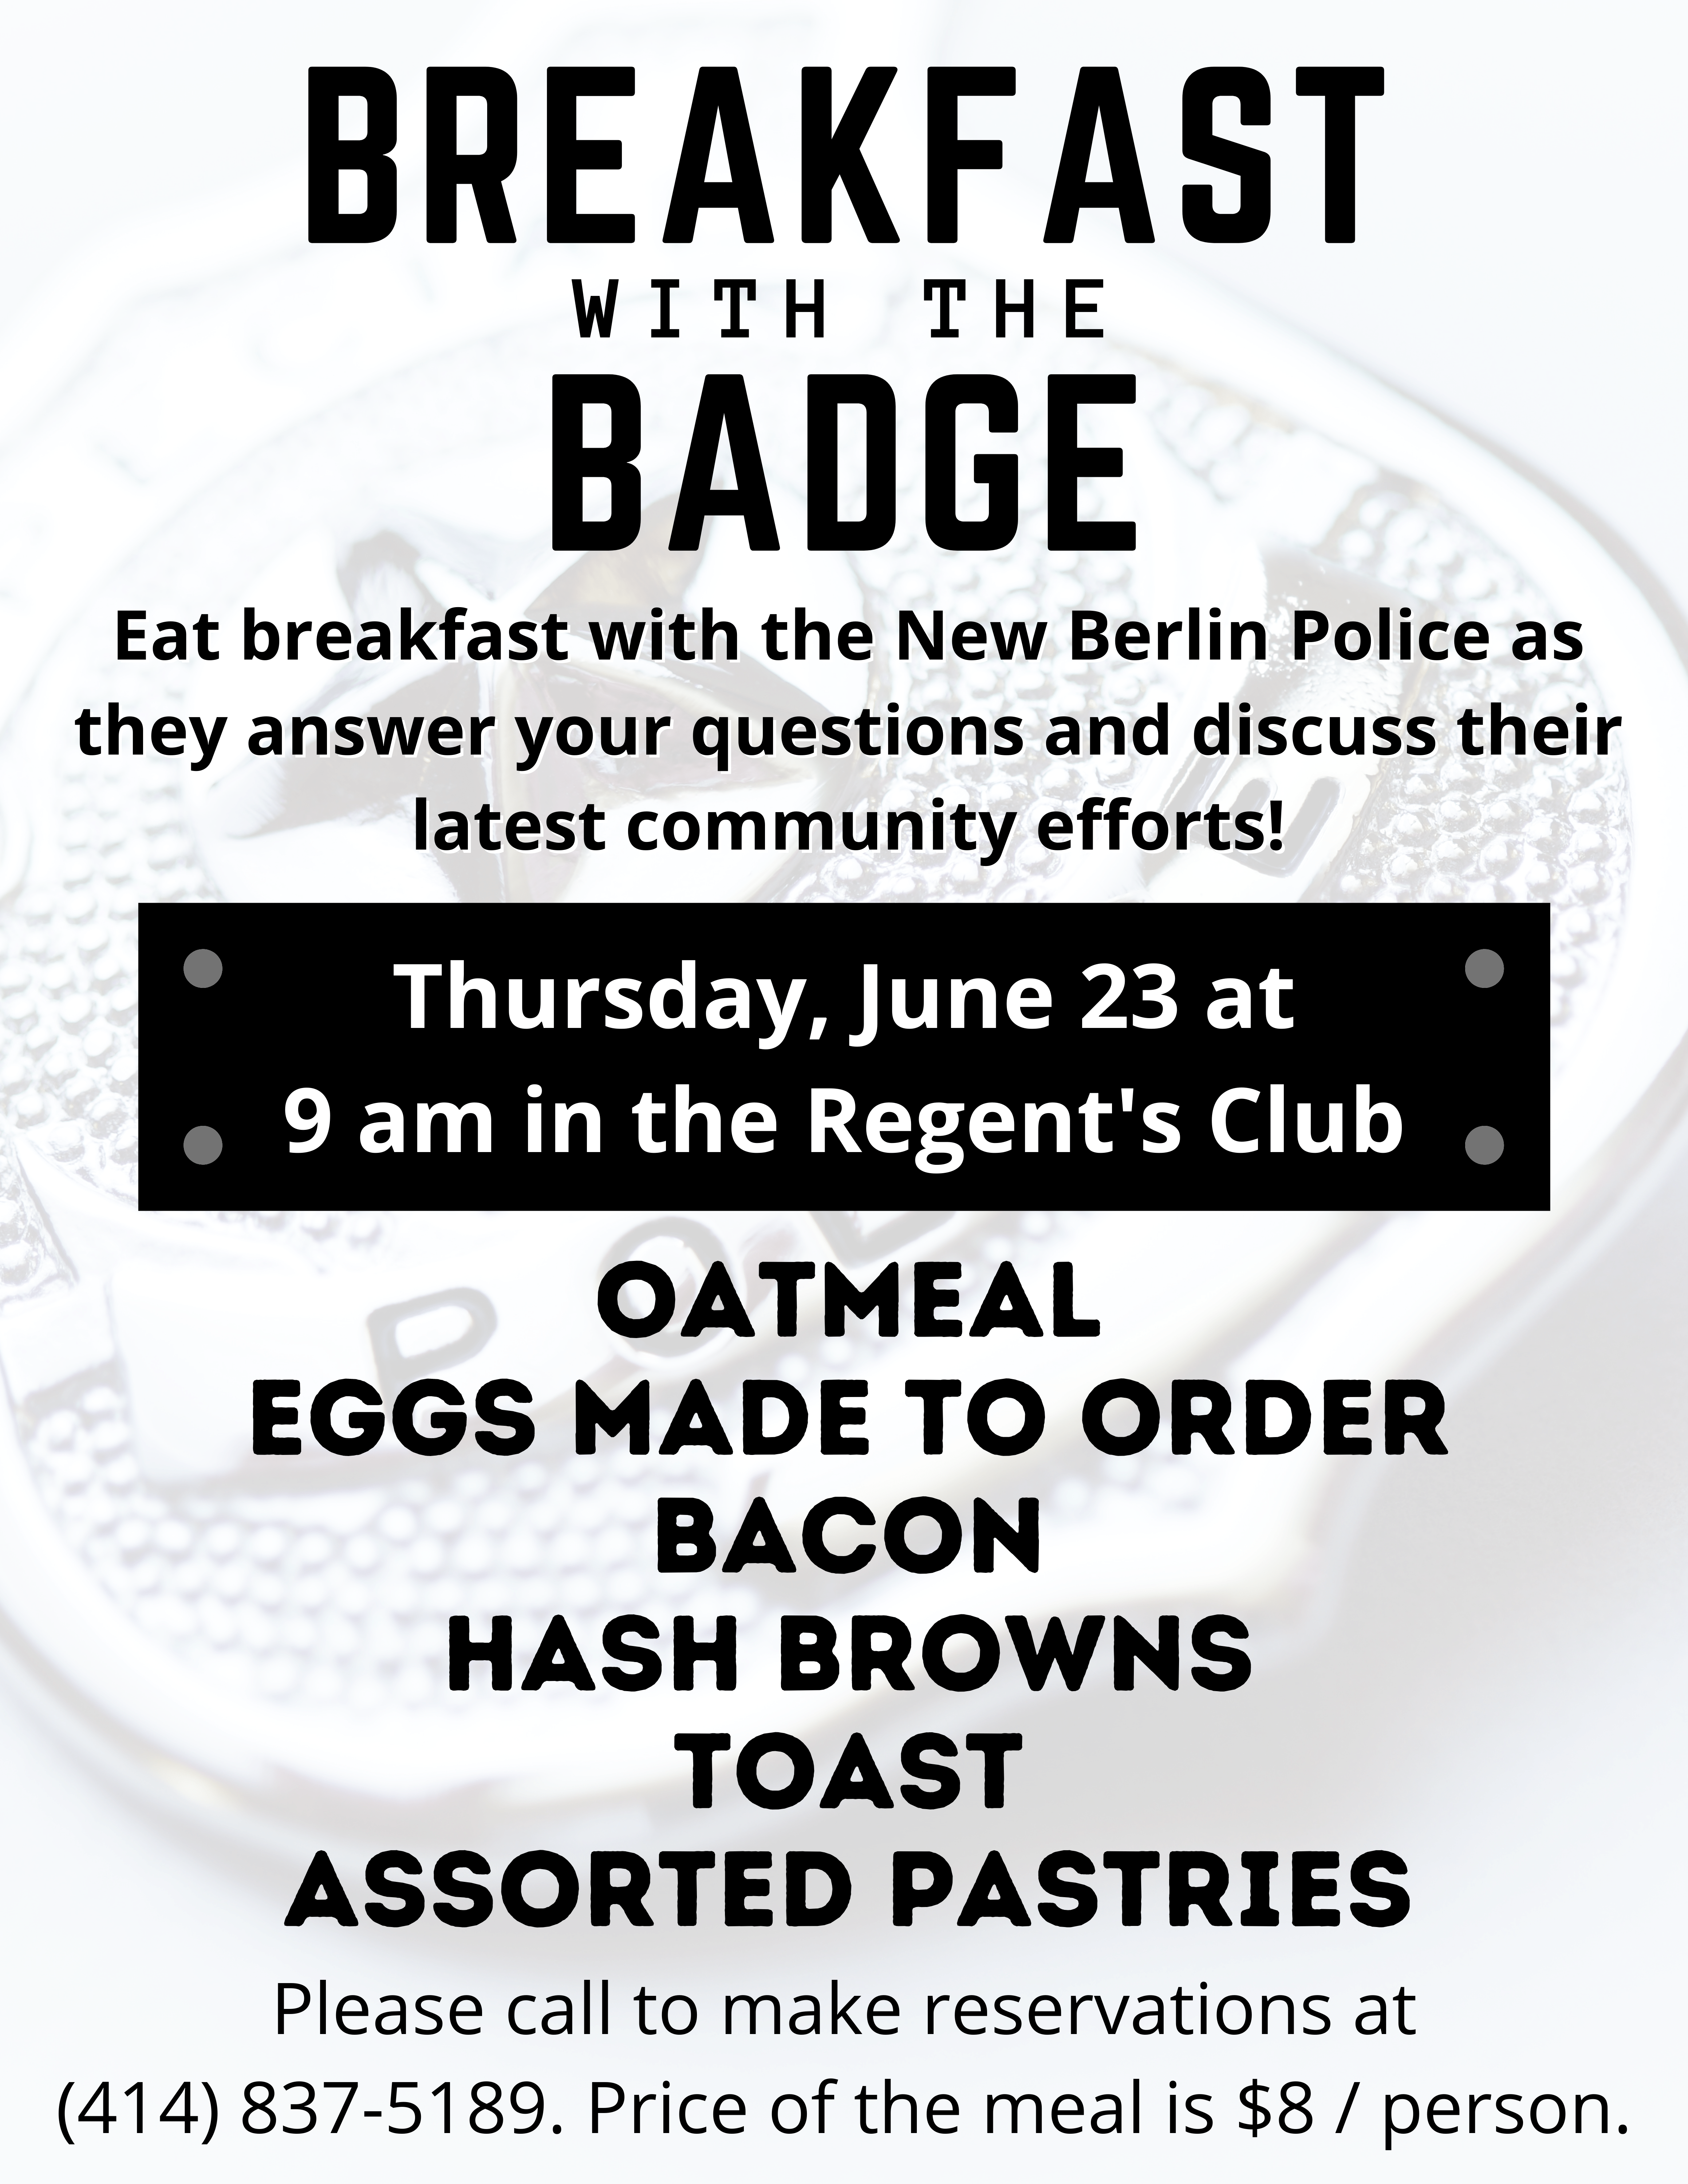 breakfast with the badge NB (1)-min.png